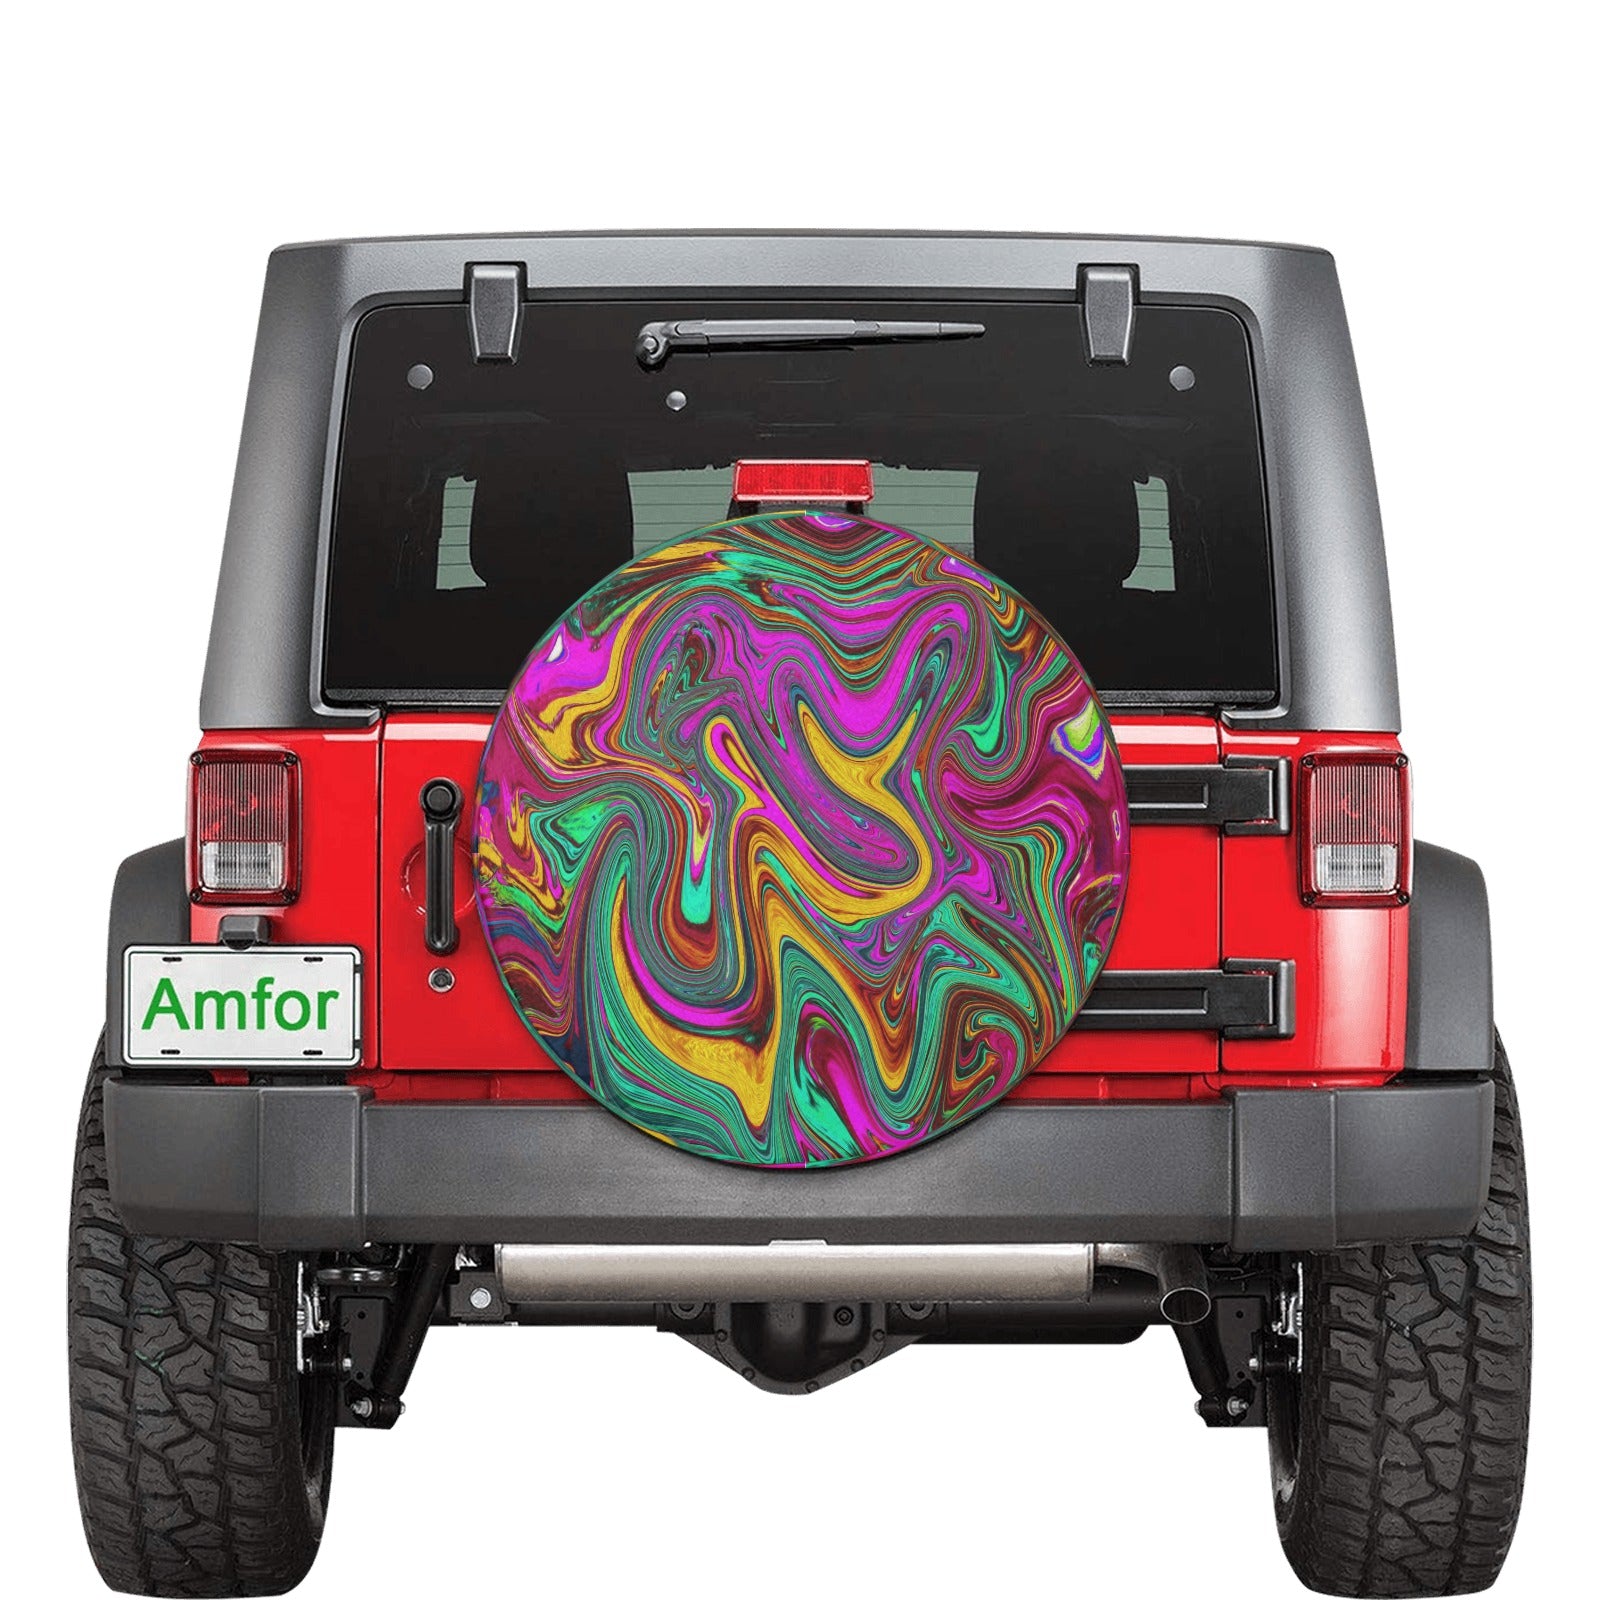 Spare Tire Covers, Marbled Hot Pink and Sea Foam Green Abstract Art - Small